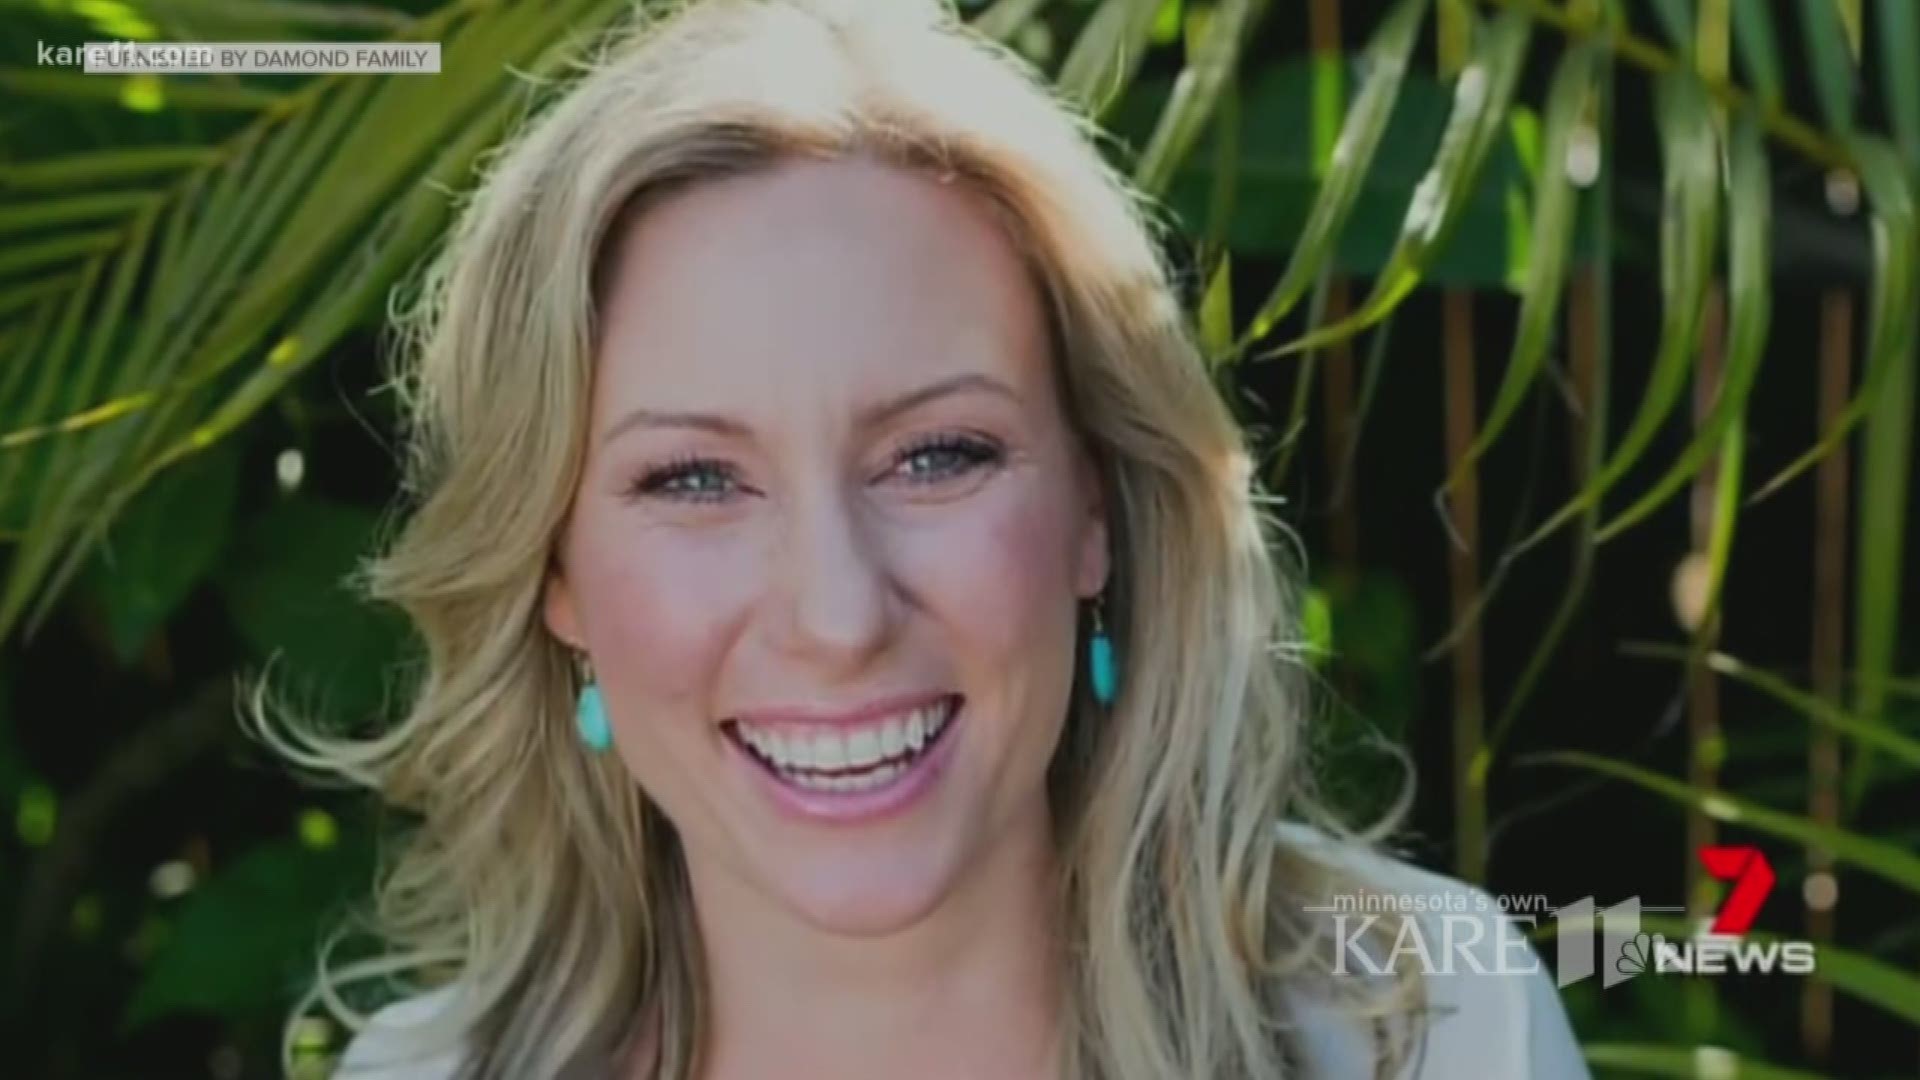 Justine Damond's community reacts to the news that Minneapolis Police Officer Mohamed Noor has been charged in her death. http://kare11.tv/2FUskgX